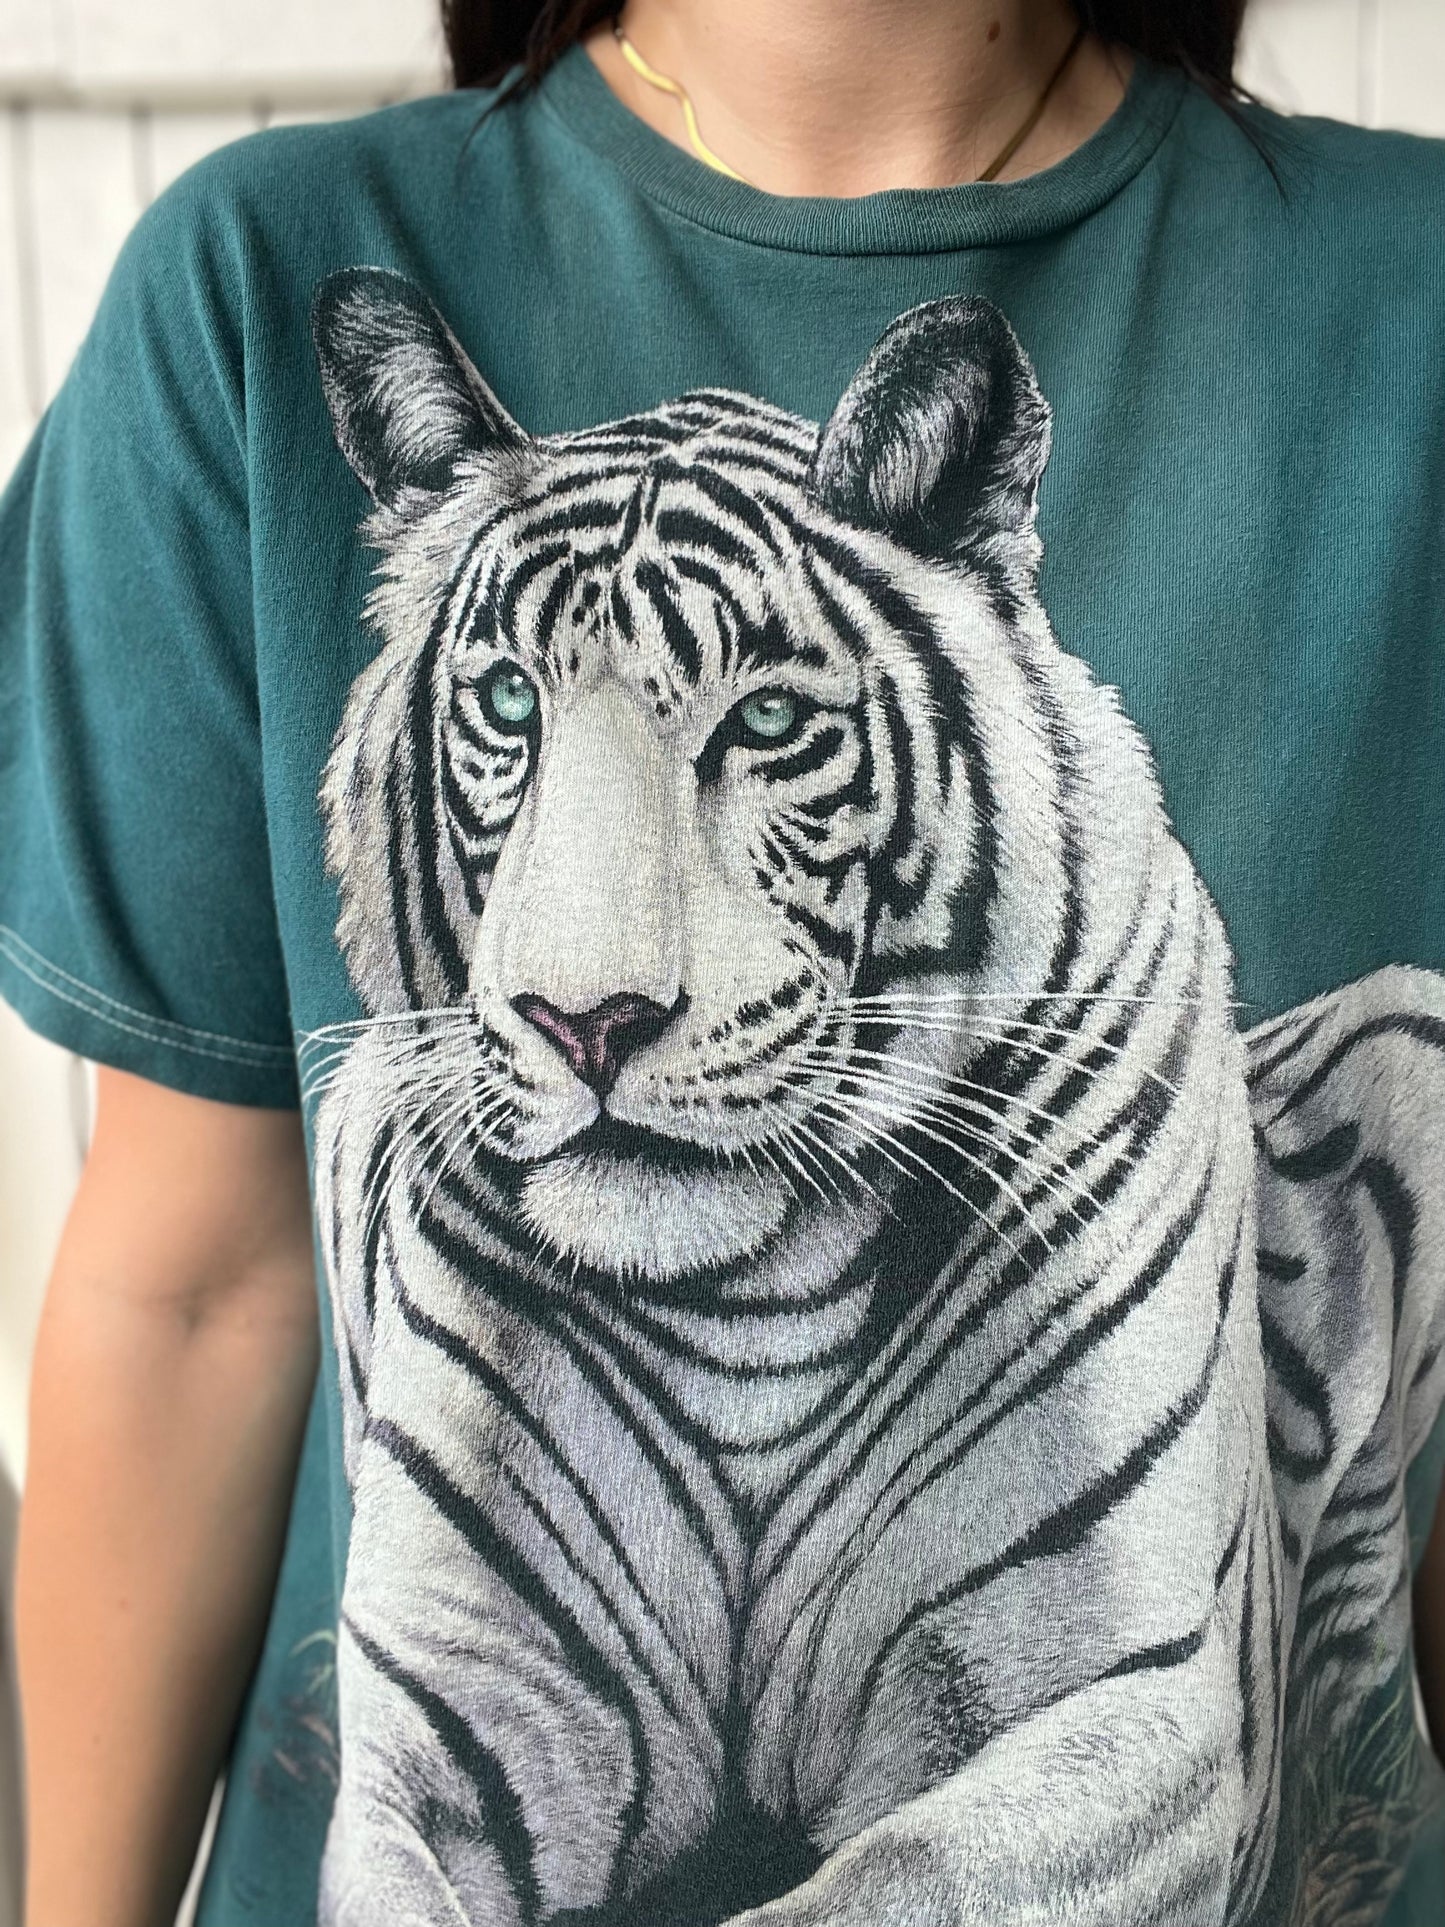 Turquoise White Tiger Tee - Size L